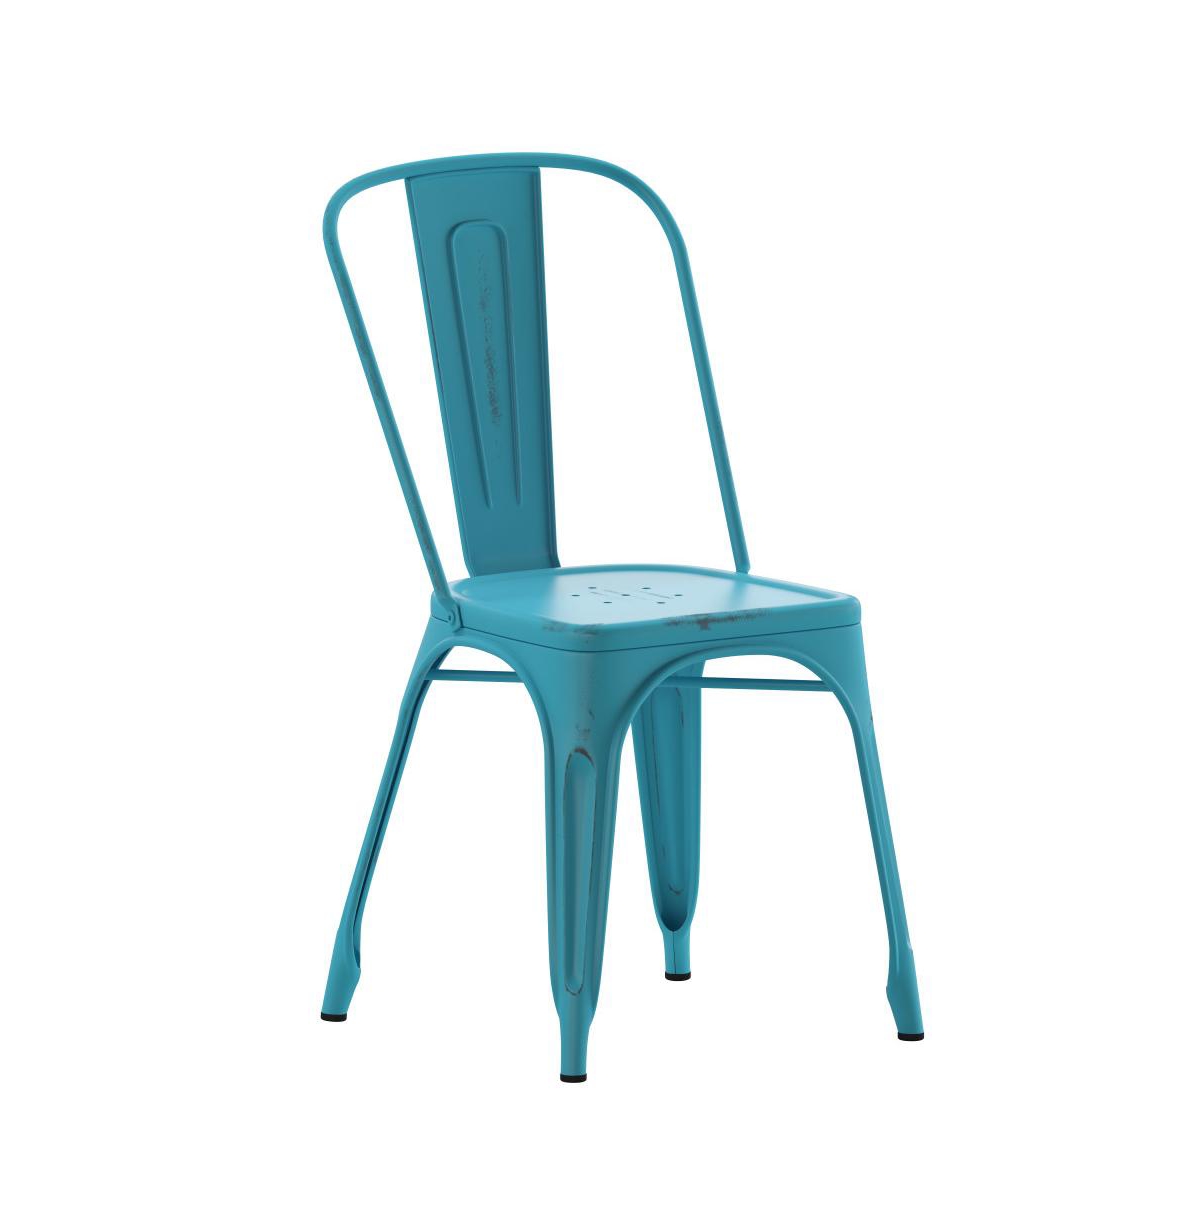 Emma+oliver Commercial Grade Distressed Colorful Metal Indoor-outdoor Stackable Chair In Blue